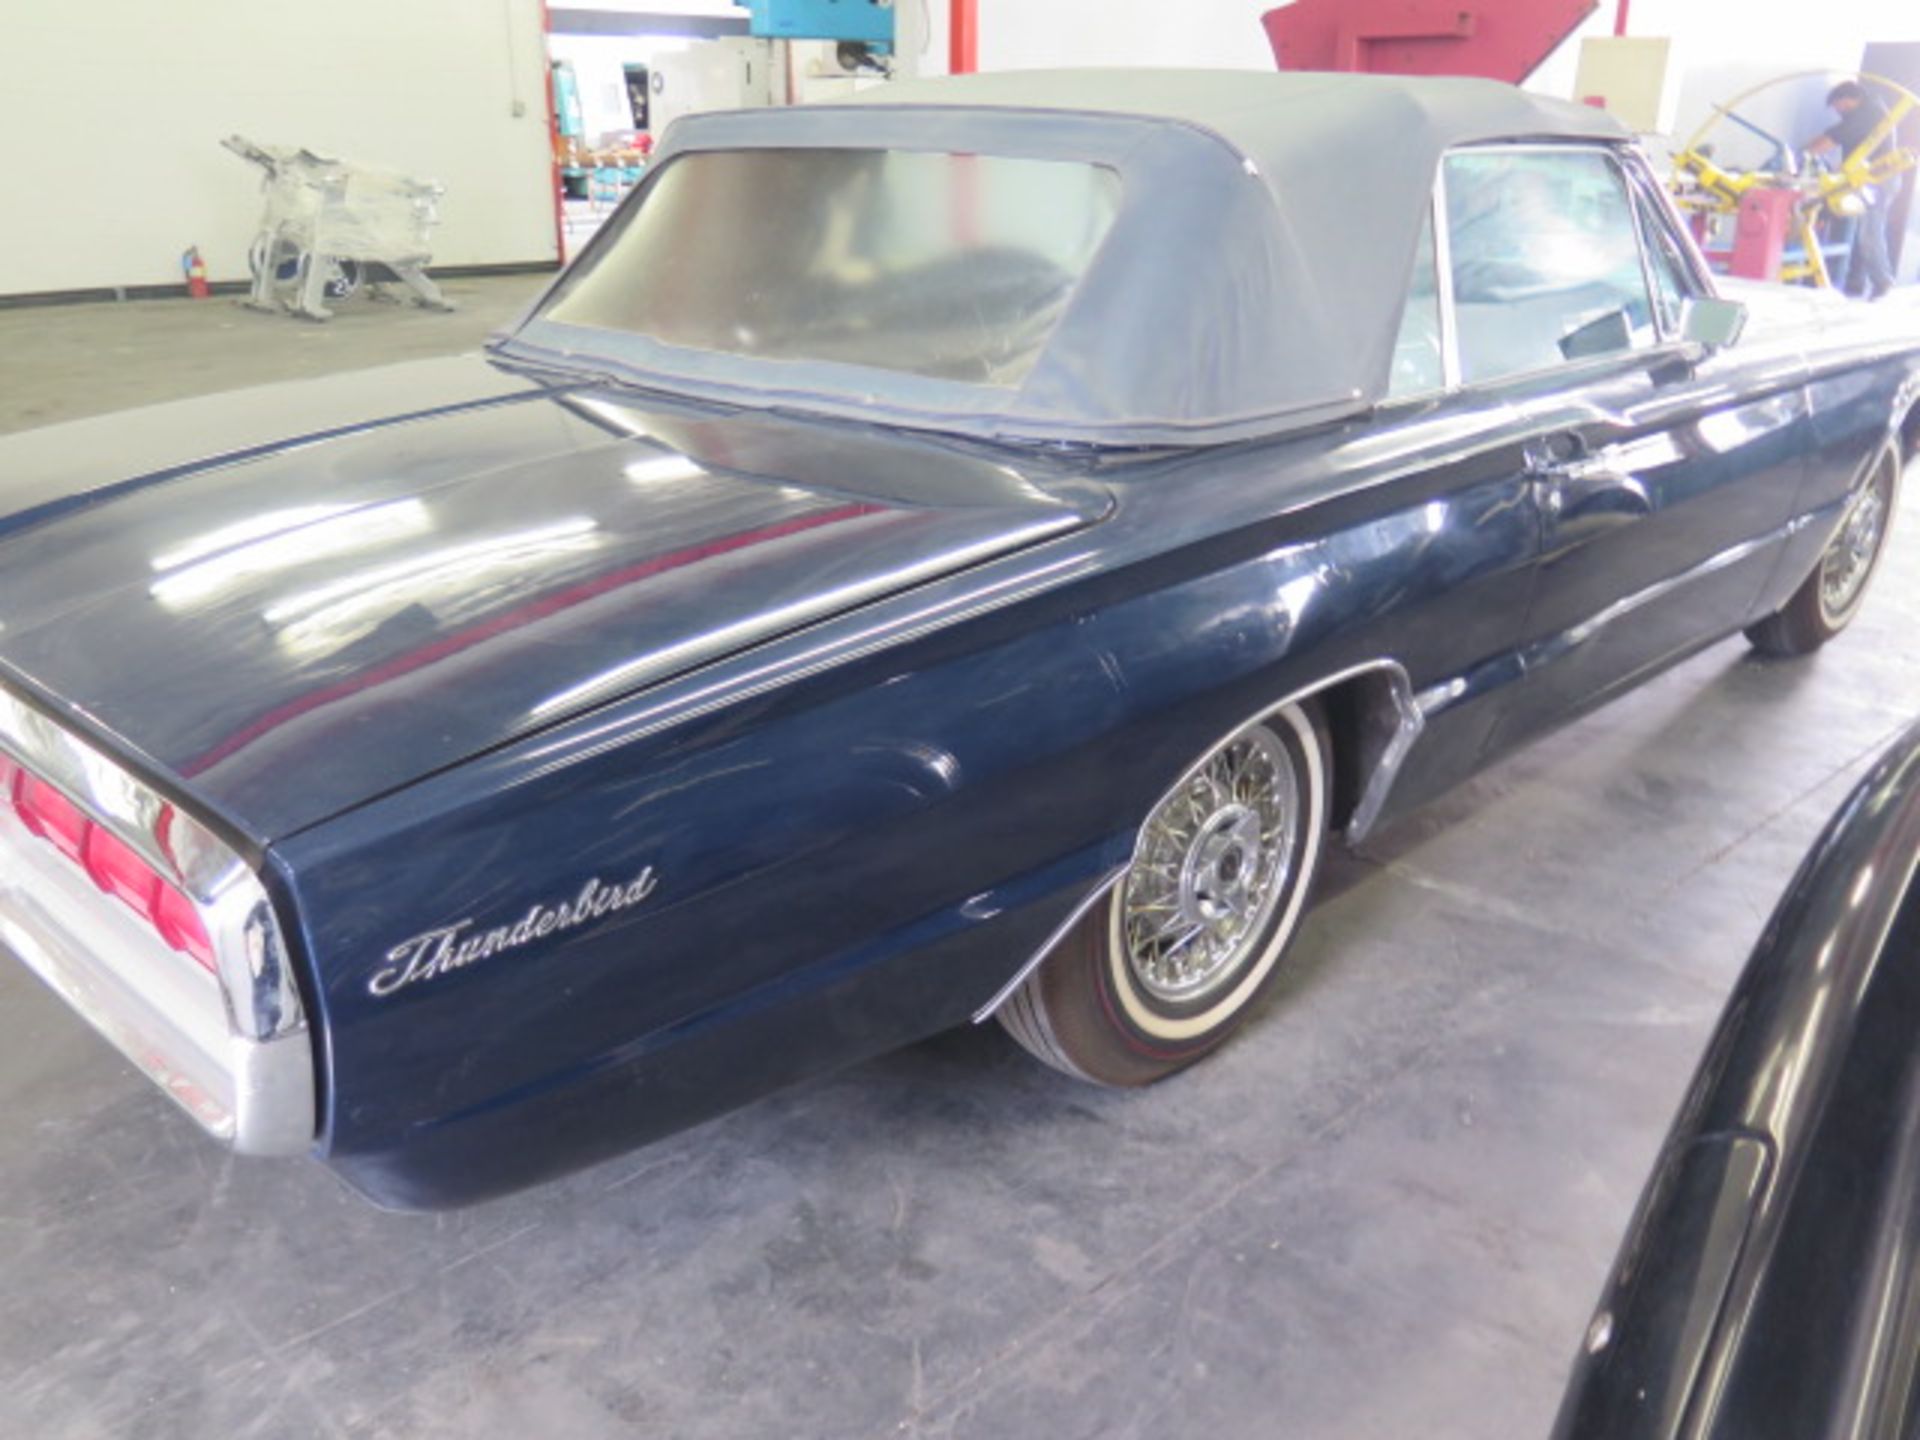 1966 Ford Thunderbird Convertible w/ “Q” Designation V8 428 CID 4 Barrel Carb Gas, SOLD AS IS - Image 8 of 46